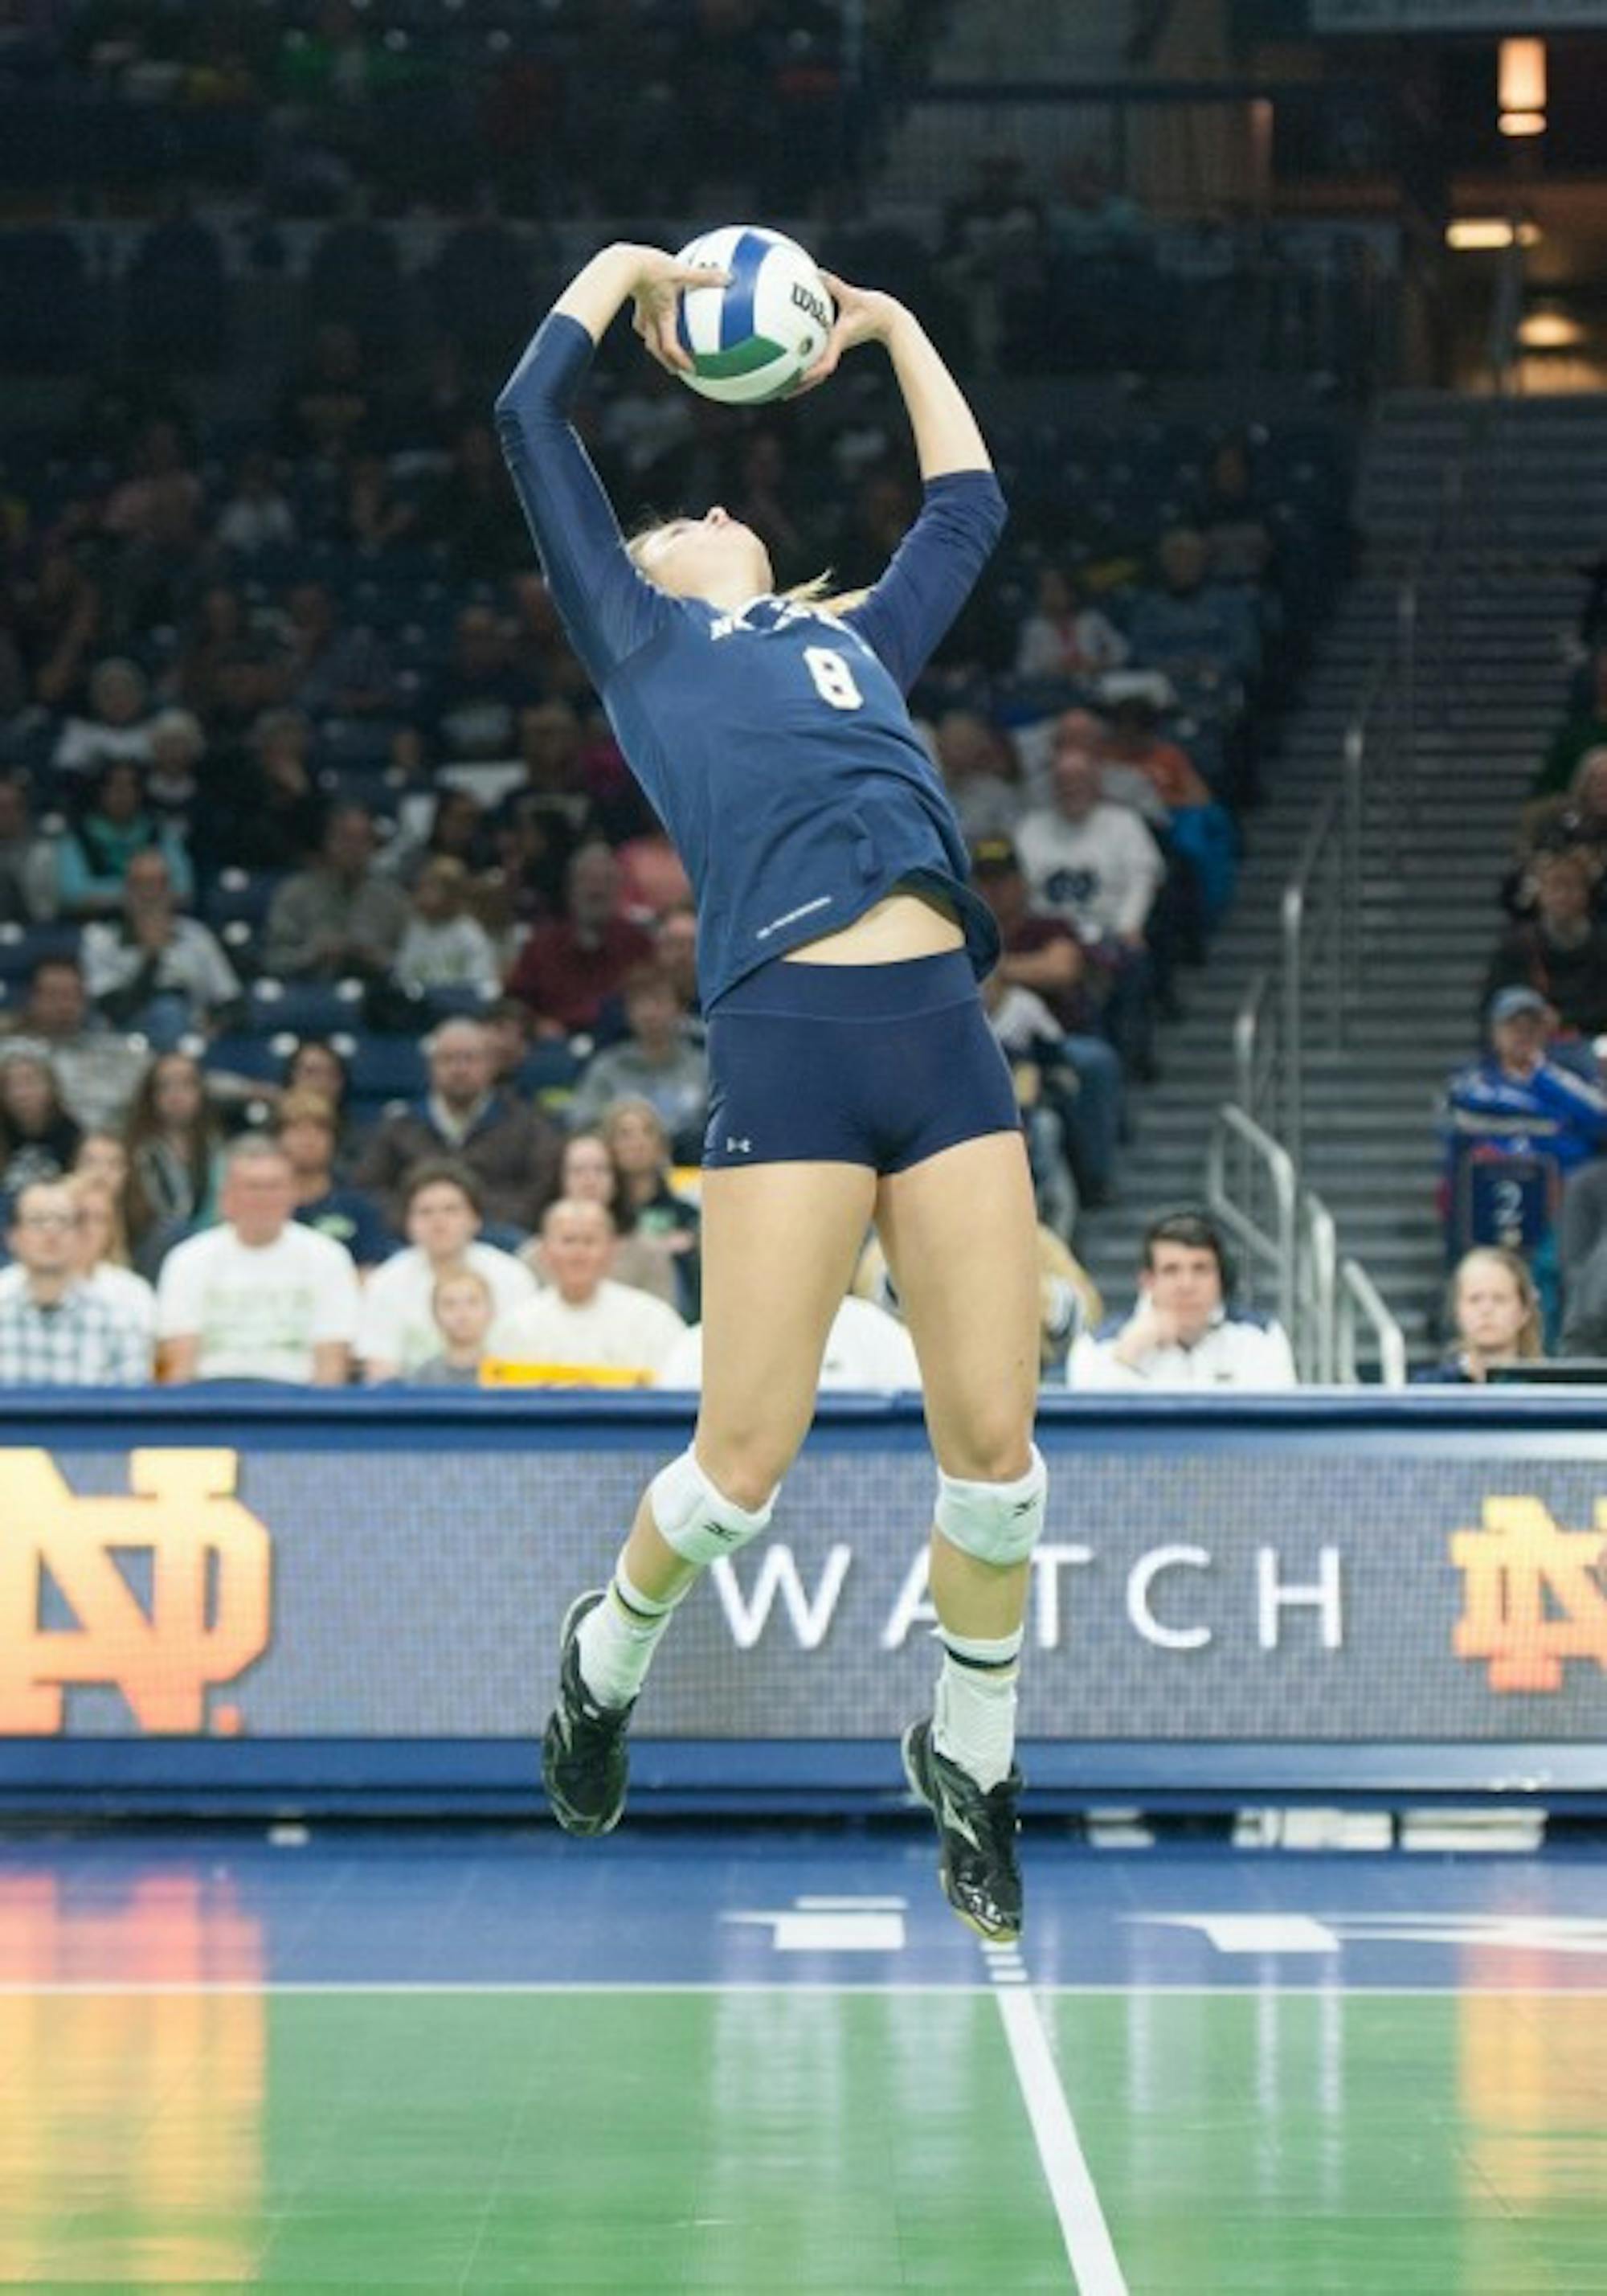 Irish sophomore setter Maddie Dilfer sets the ball during Notre Dame’s 3-0 loss to Pittsburgh at Purcell Pavilion on Nov. 28.